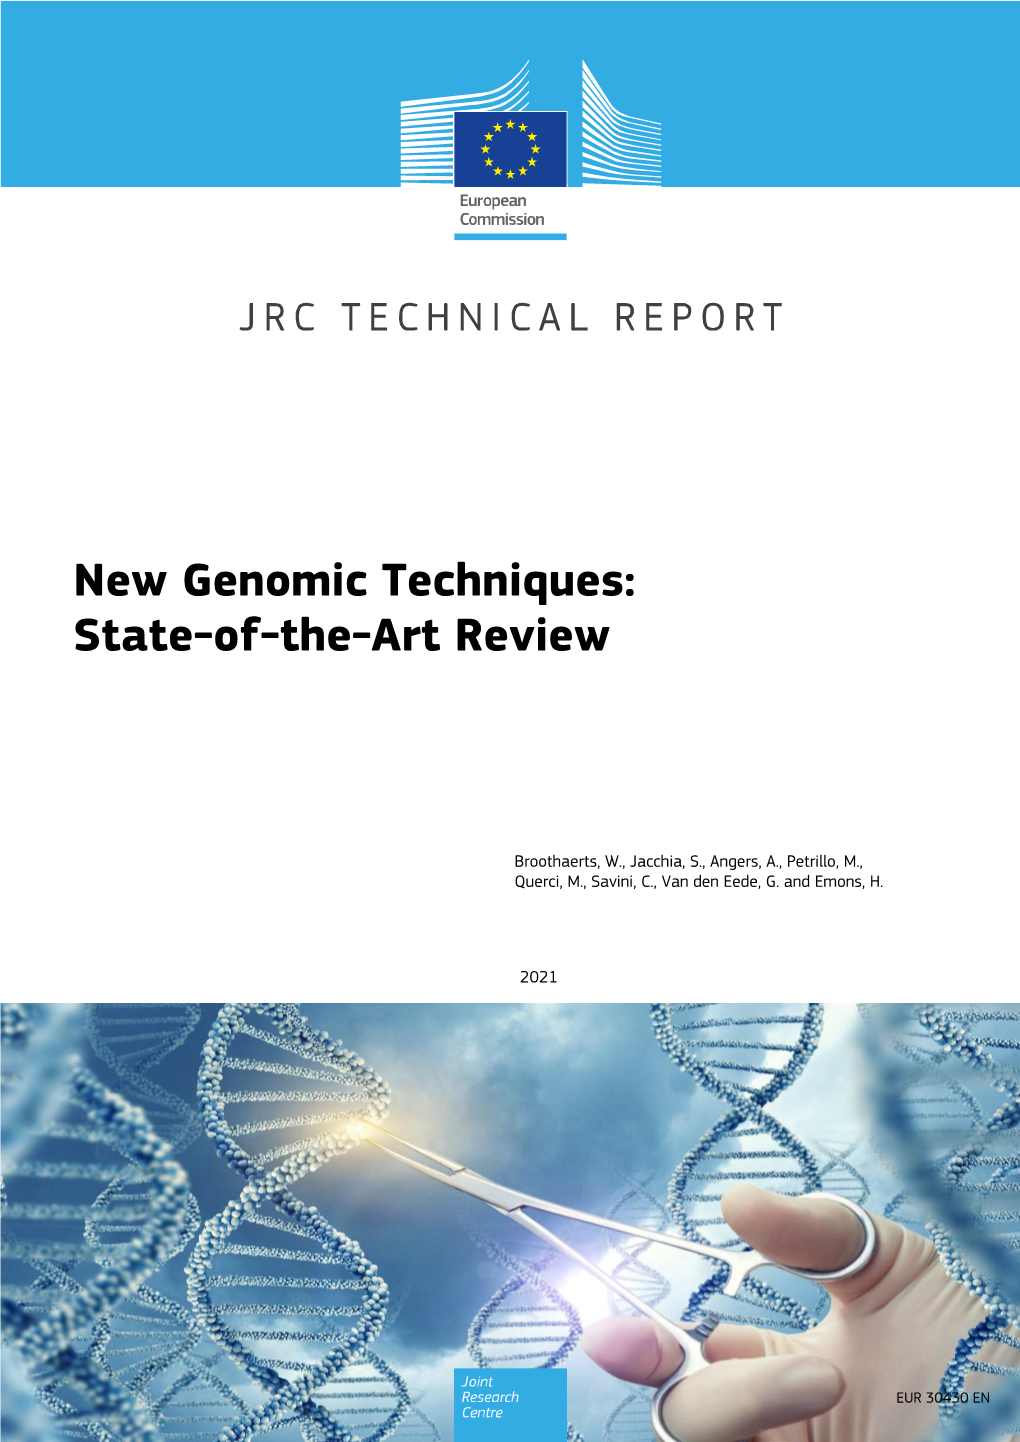 New Genomic Techniques: State-Of-The-Art Review